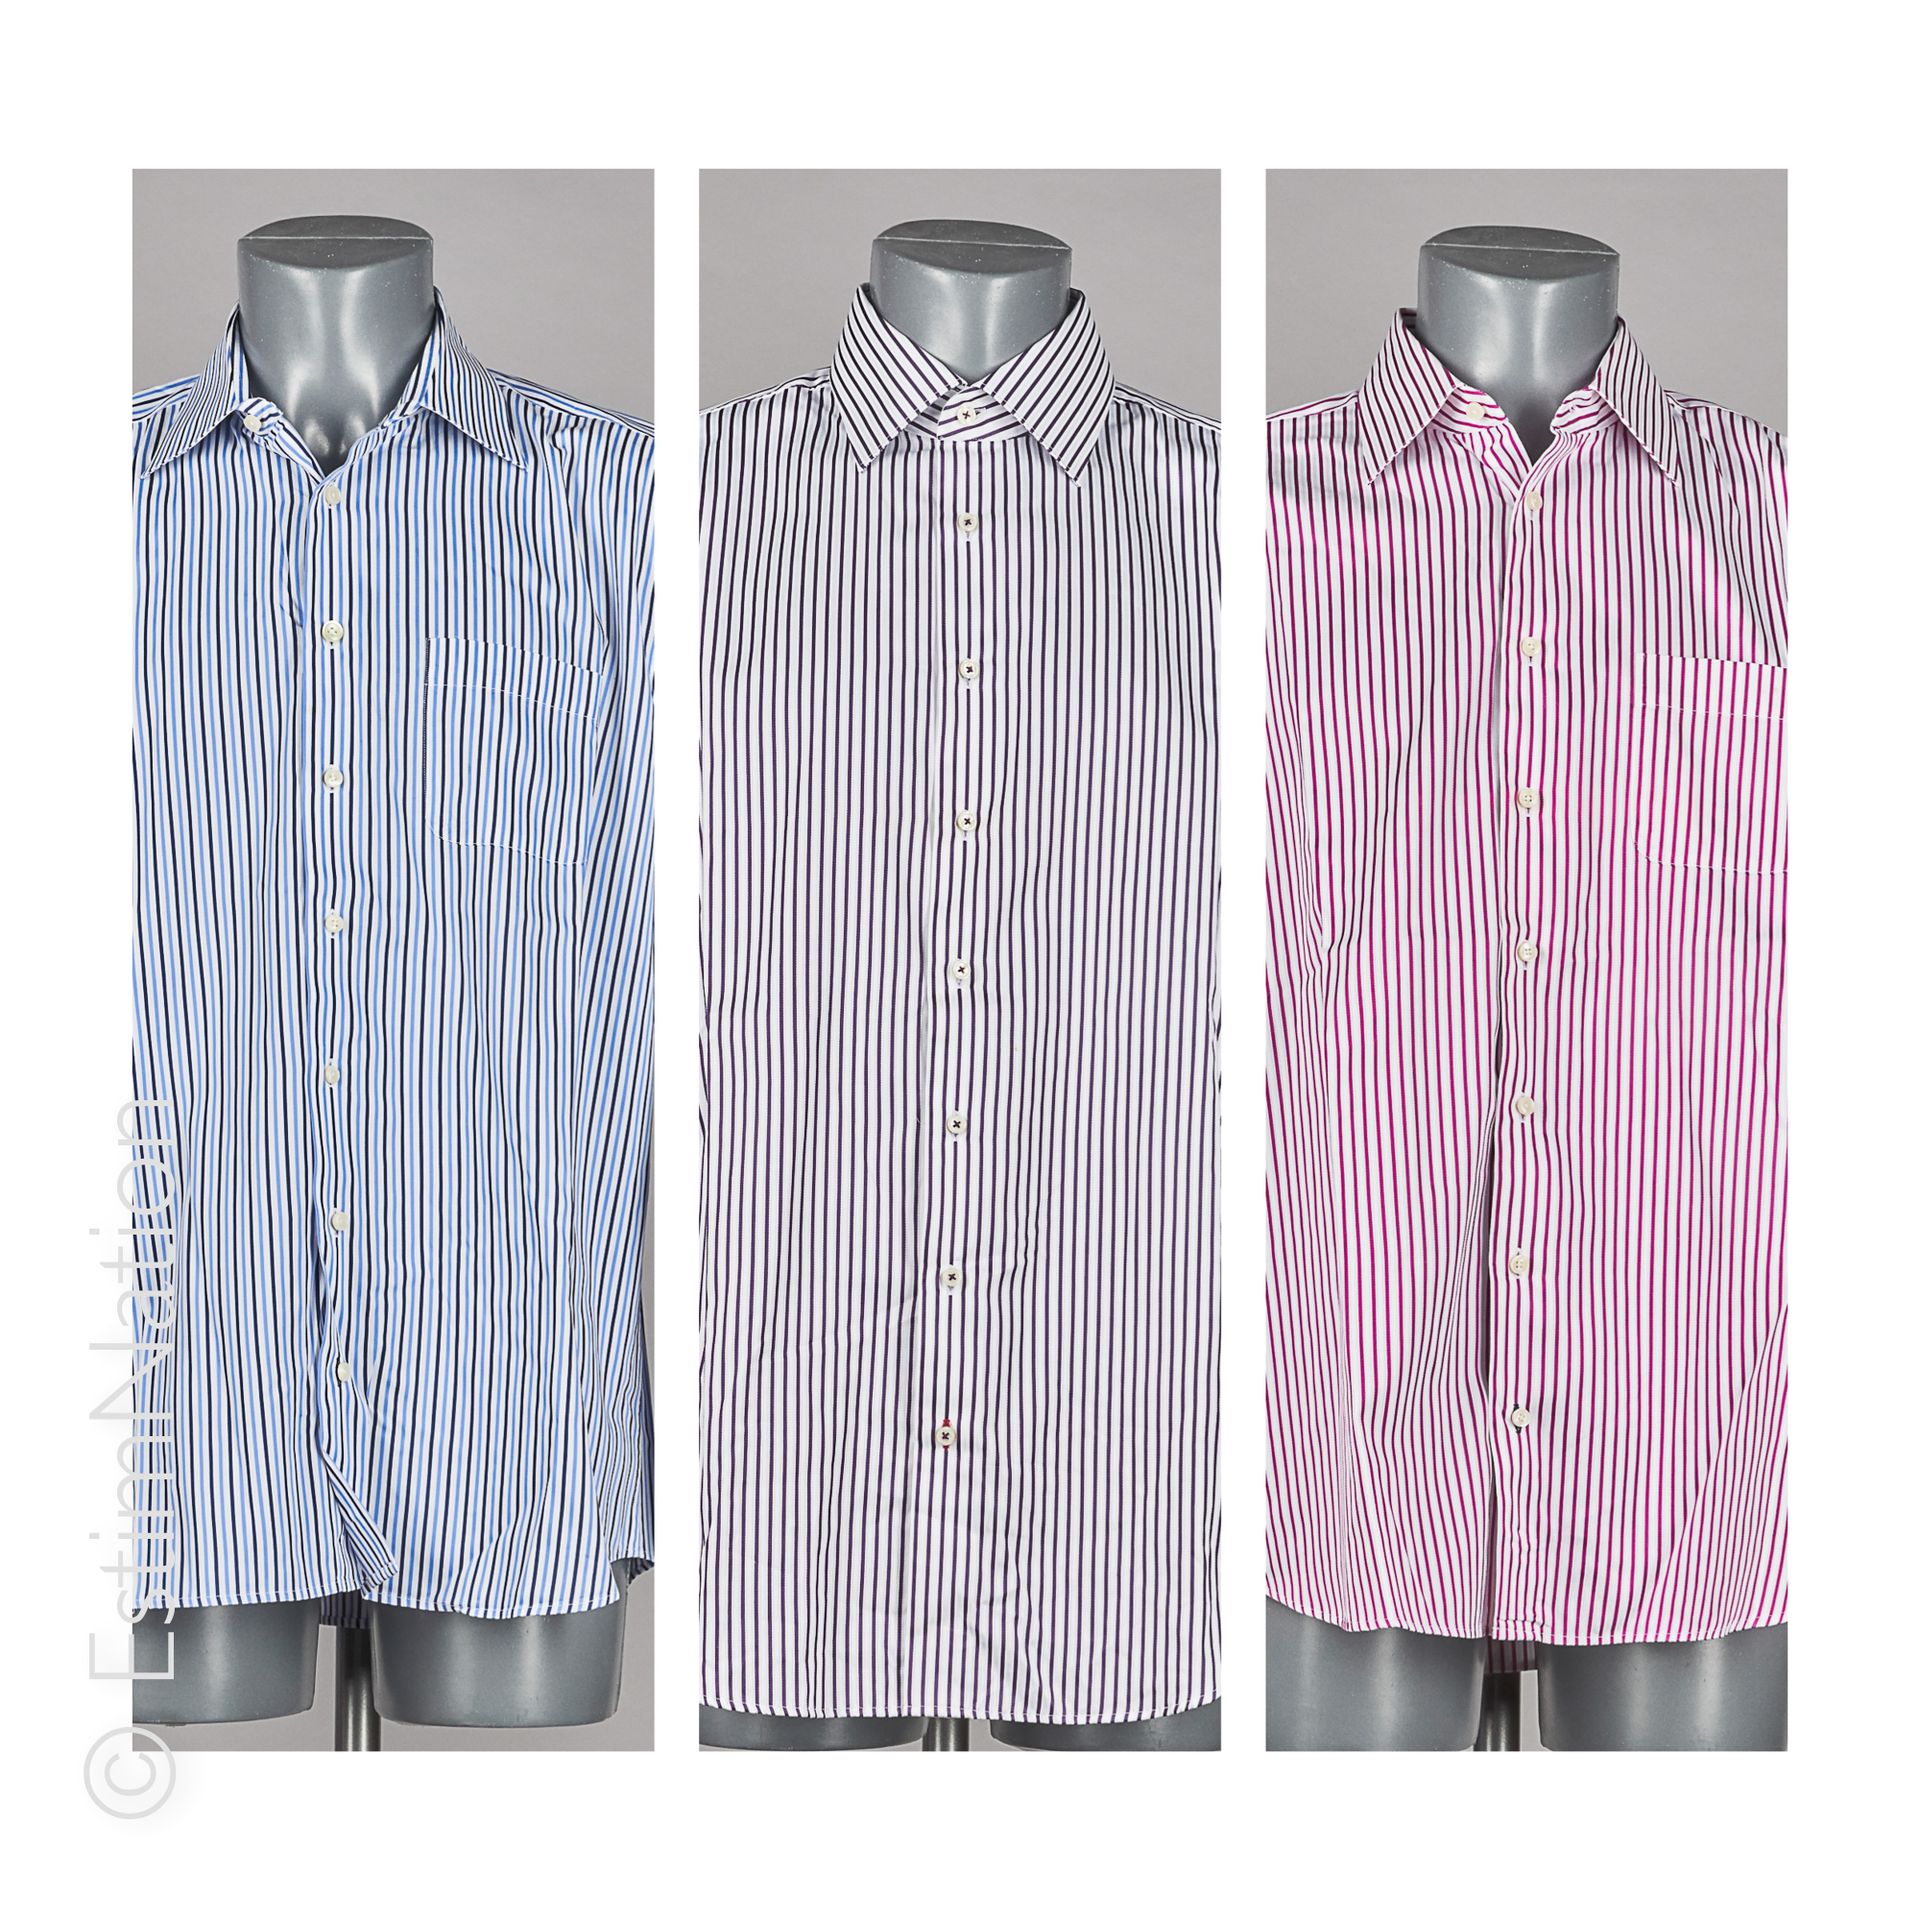 TOMMY HILFIGER THREE SHIRTS in striped cotton (S 16/41) (no guarantee of conditi&hellip;